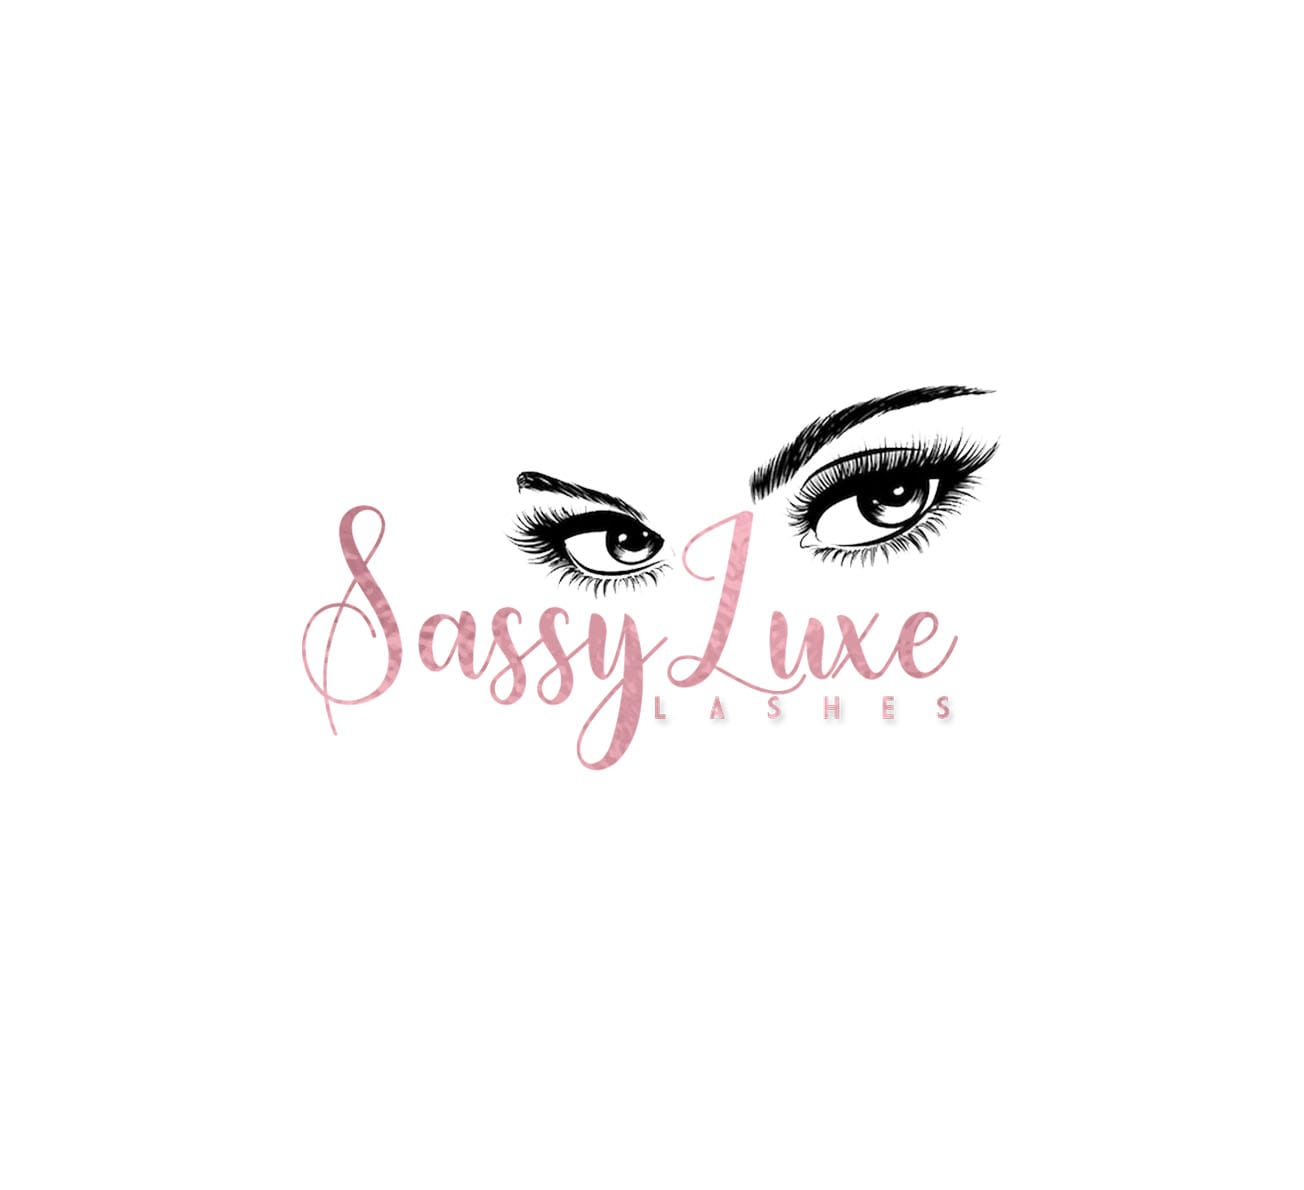 Sassy Luxe Lashes